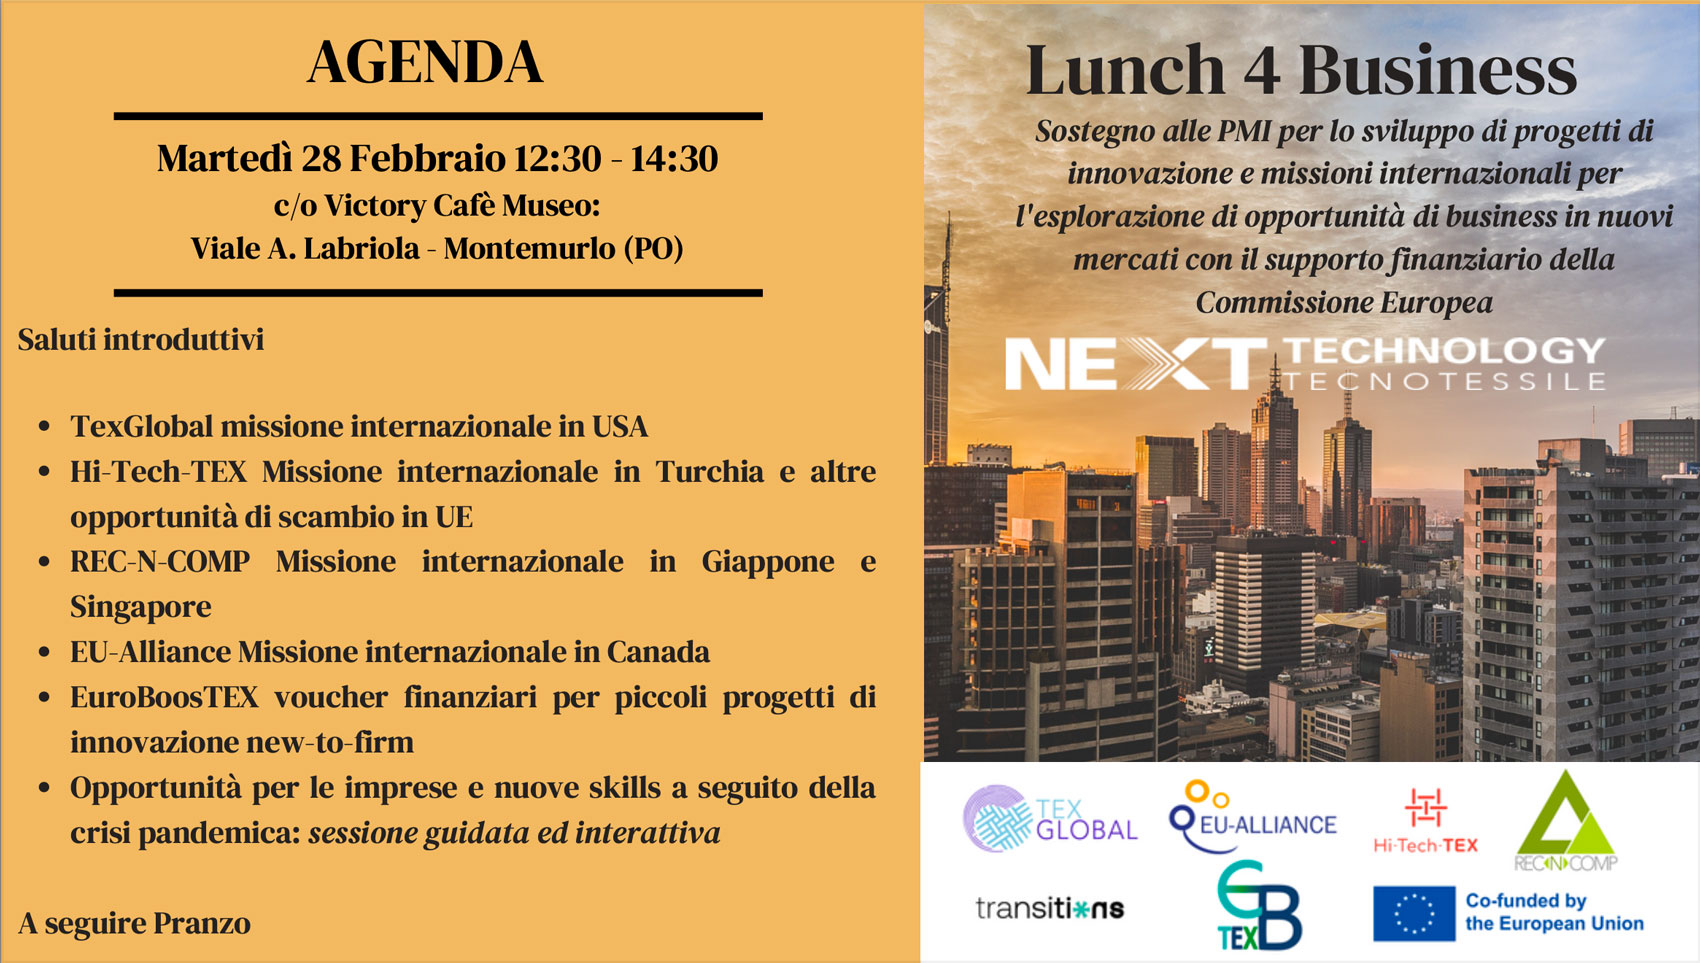 Agenda Lunch for Business - Next Technology Tecnotessile